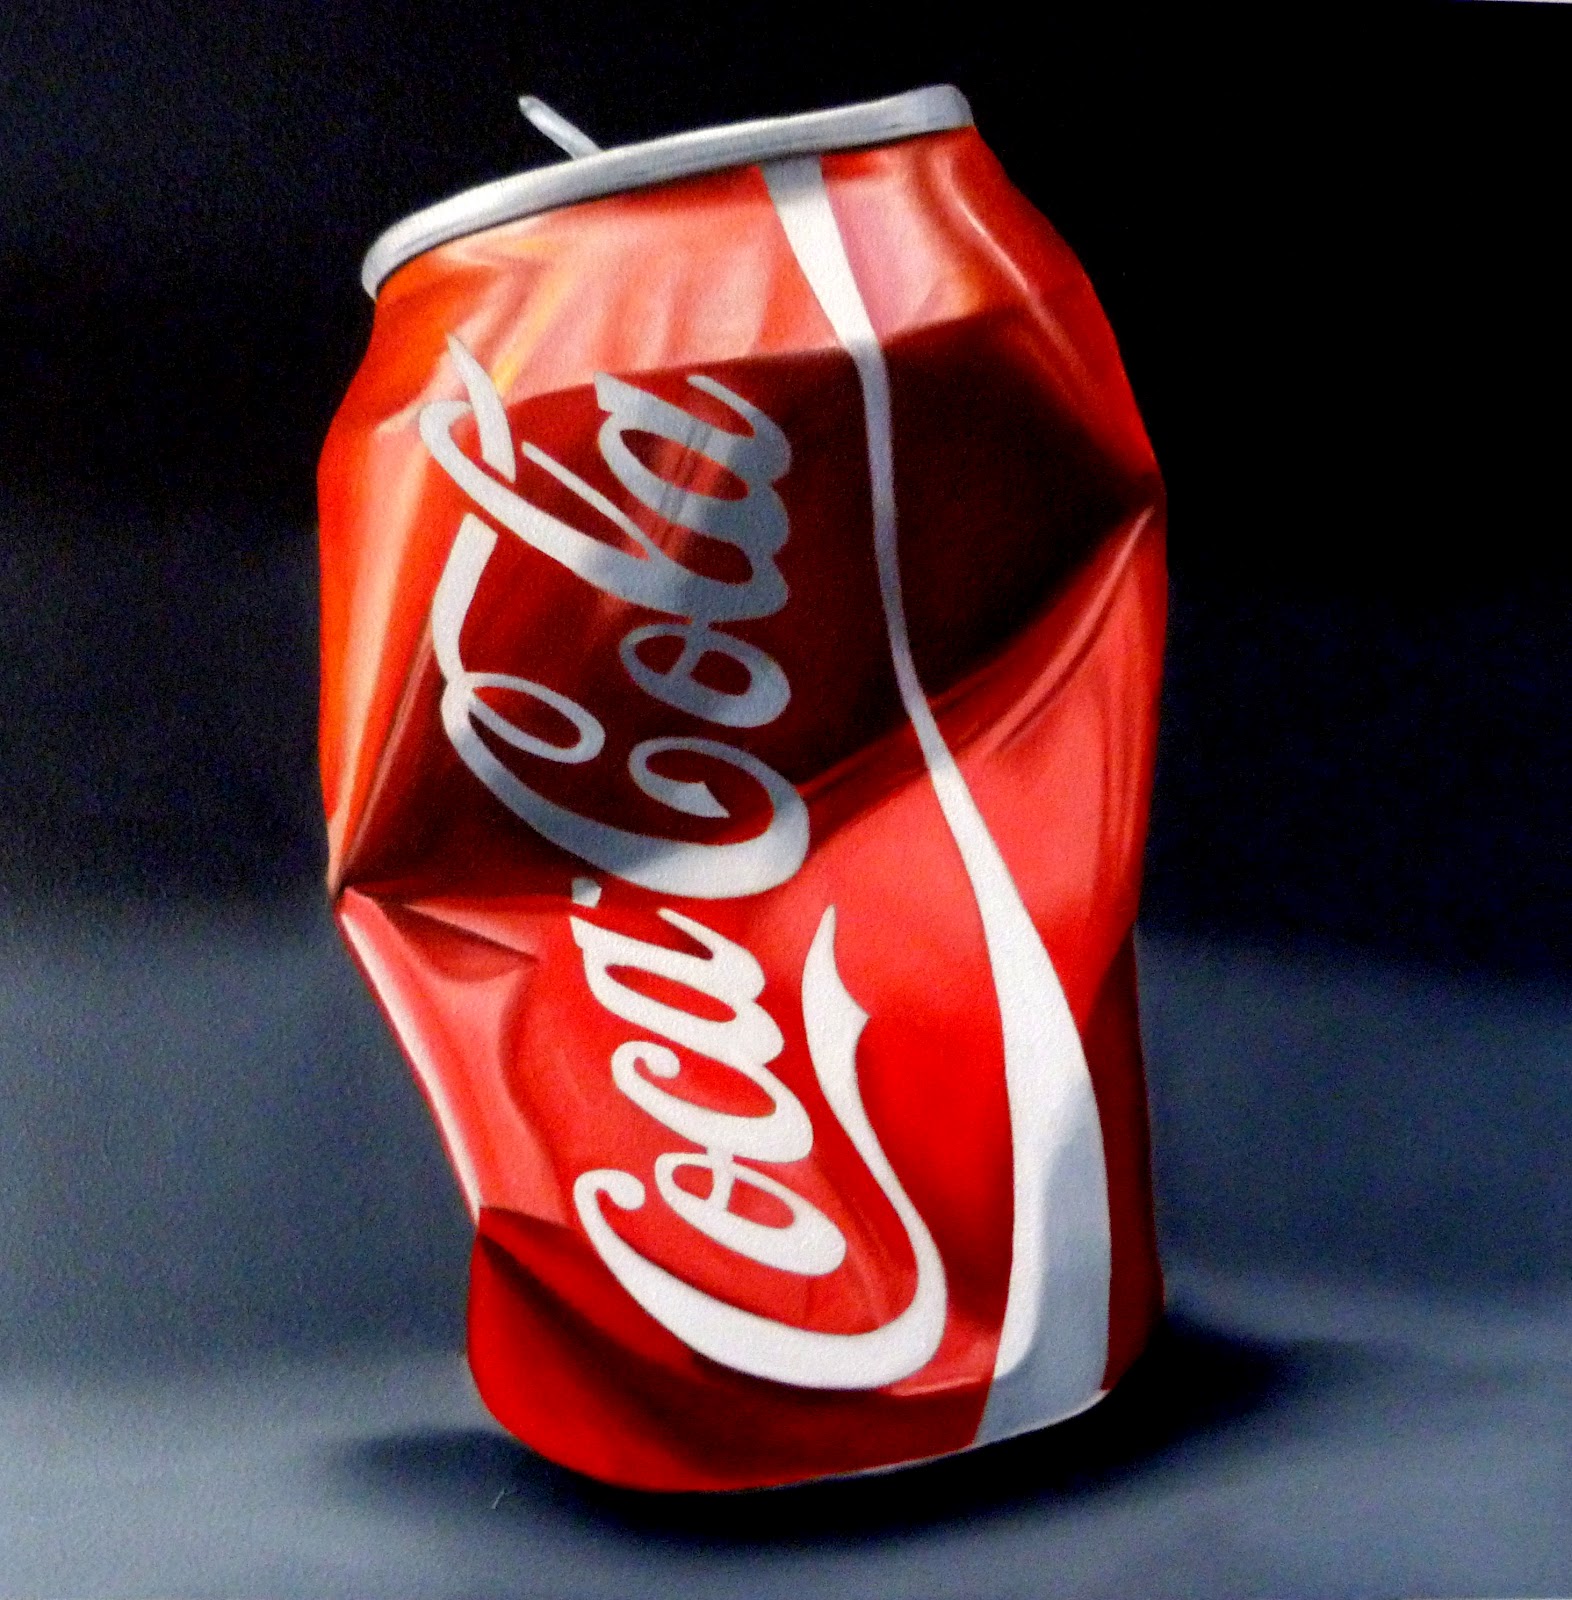 chris morgan - the art of realism: Cola cans and exhibitions